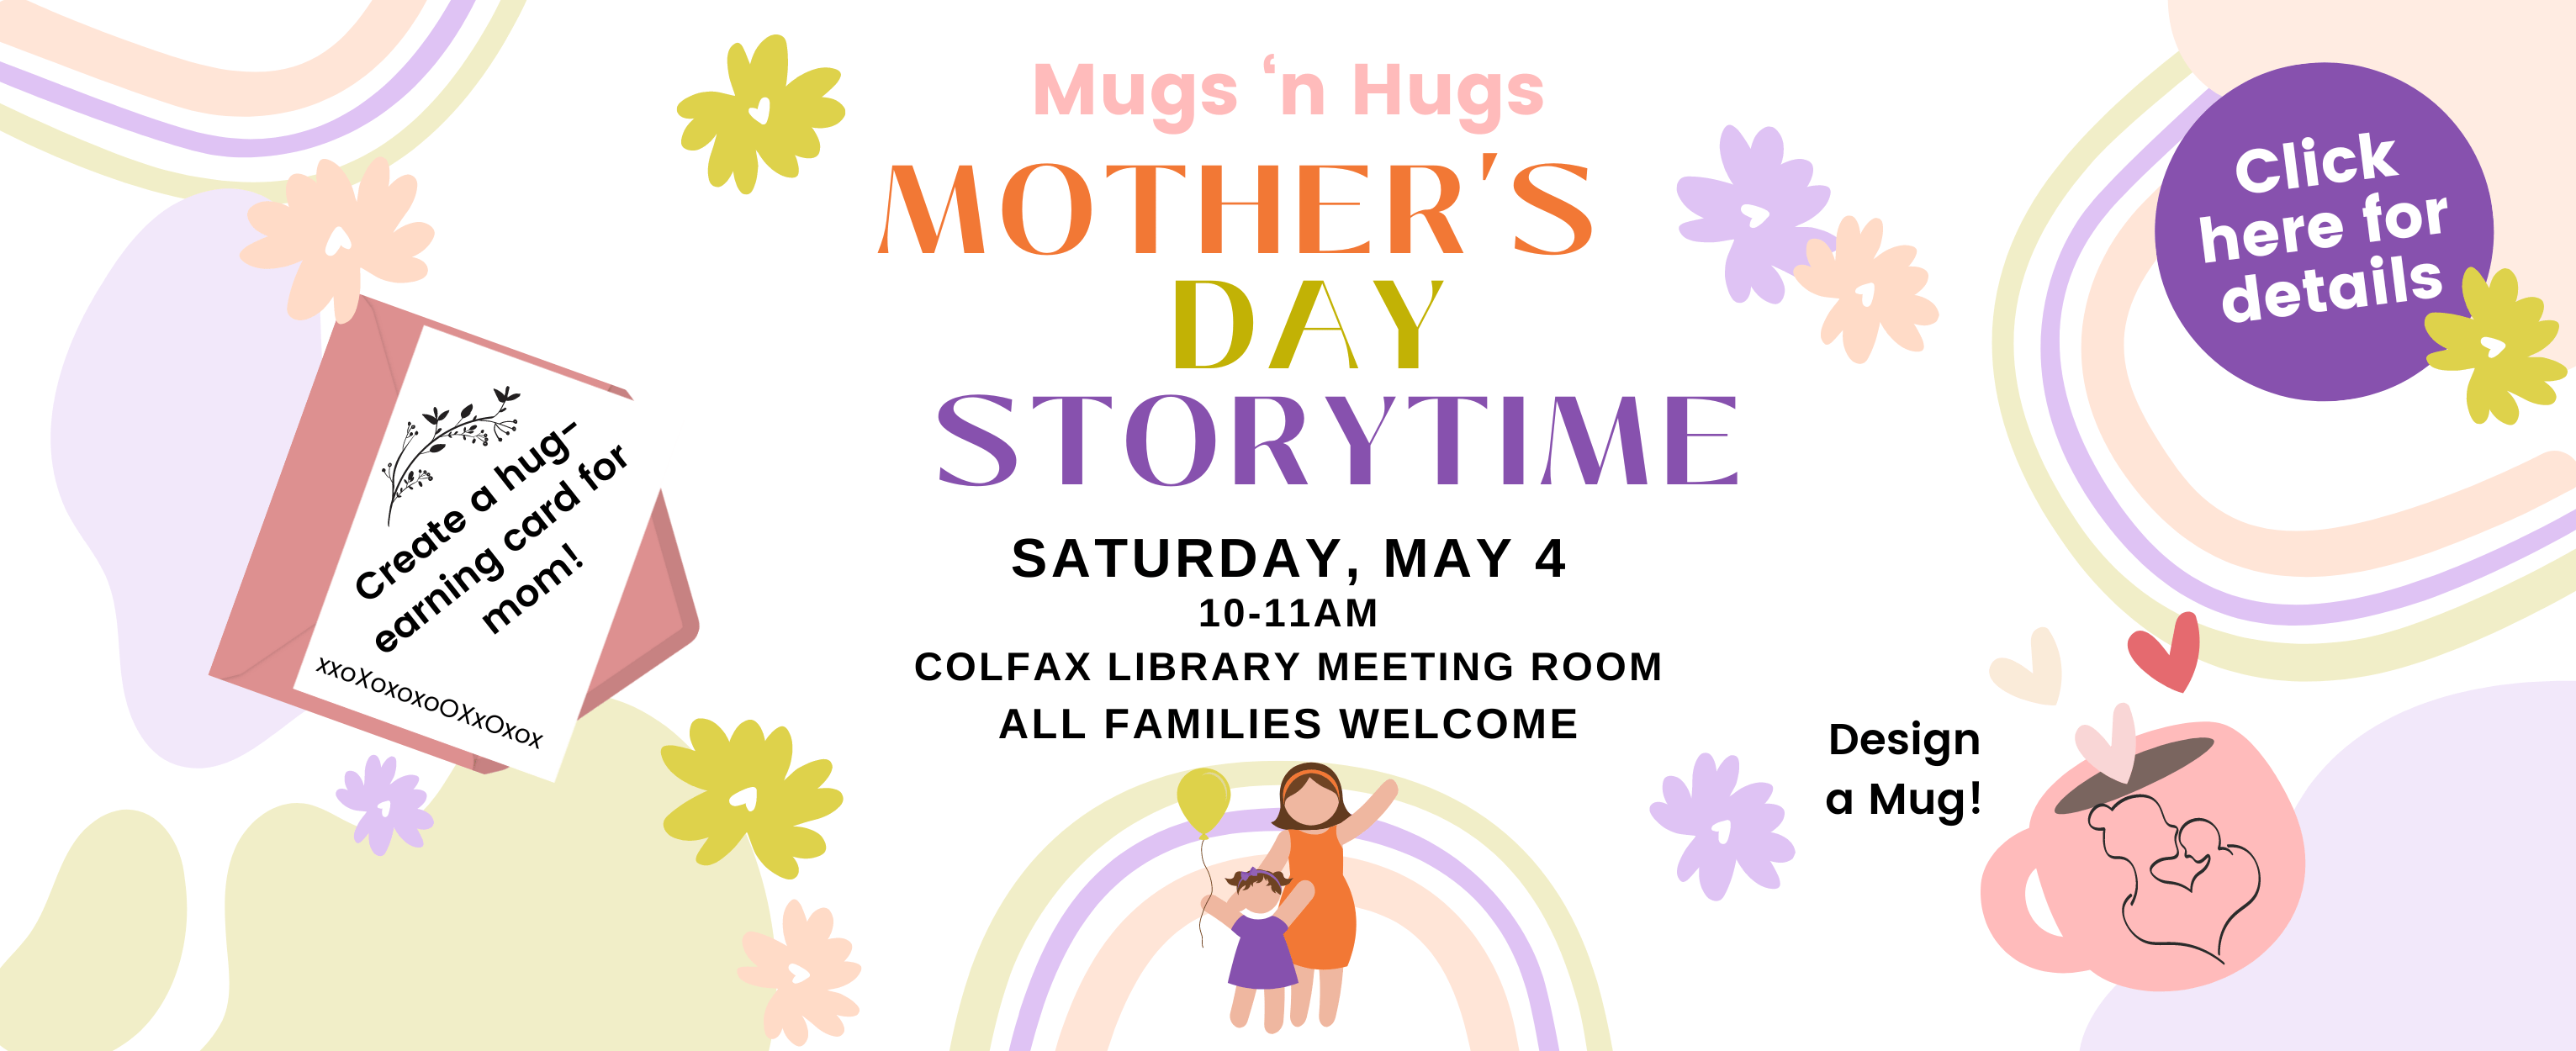 Join us for a special Mother's Day Event at the Colfax Library on Saturday, May 4! Mug and card making for mom from 10-11 AM. Click here for details.